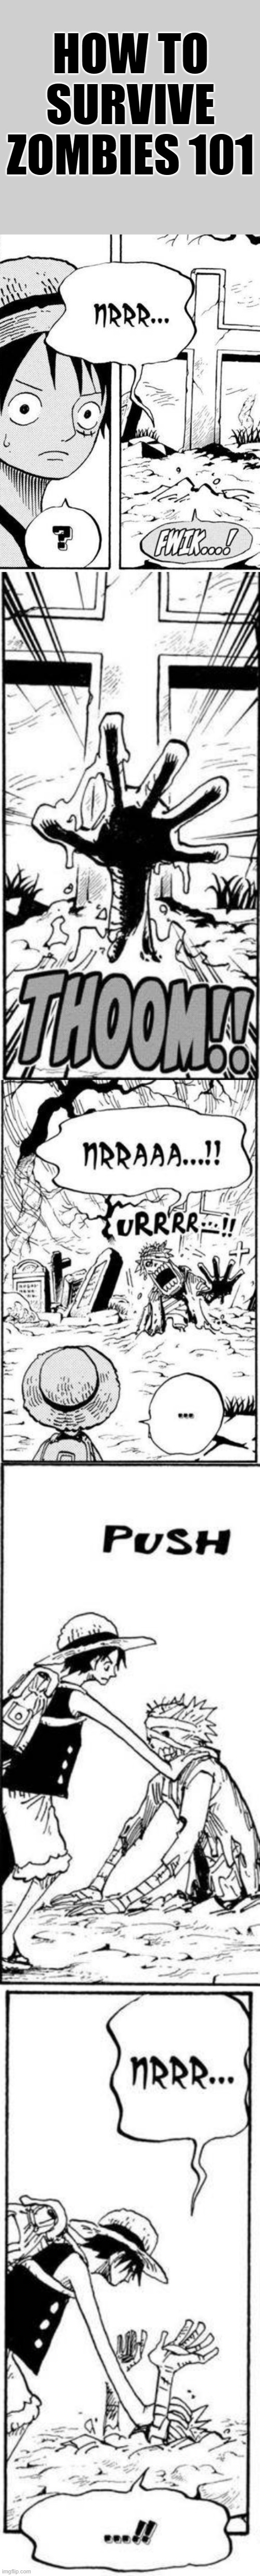 Apologies for the low quality xD | HOW TO SURVIVE ZOMBIES 101 | image tagged in one piece,luffy,memes,funny,comics/cartoons,zombies | made w/ Imgflip meme maker